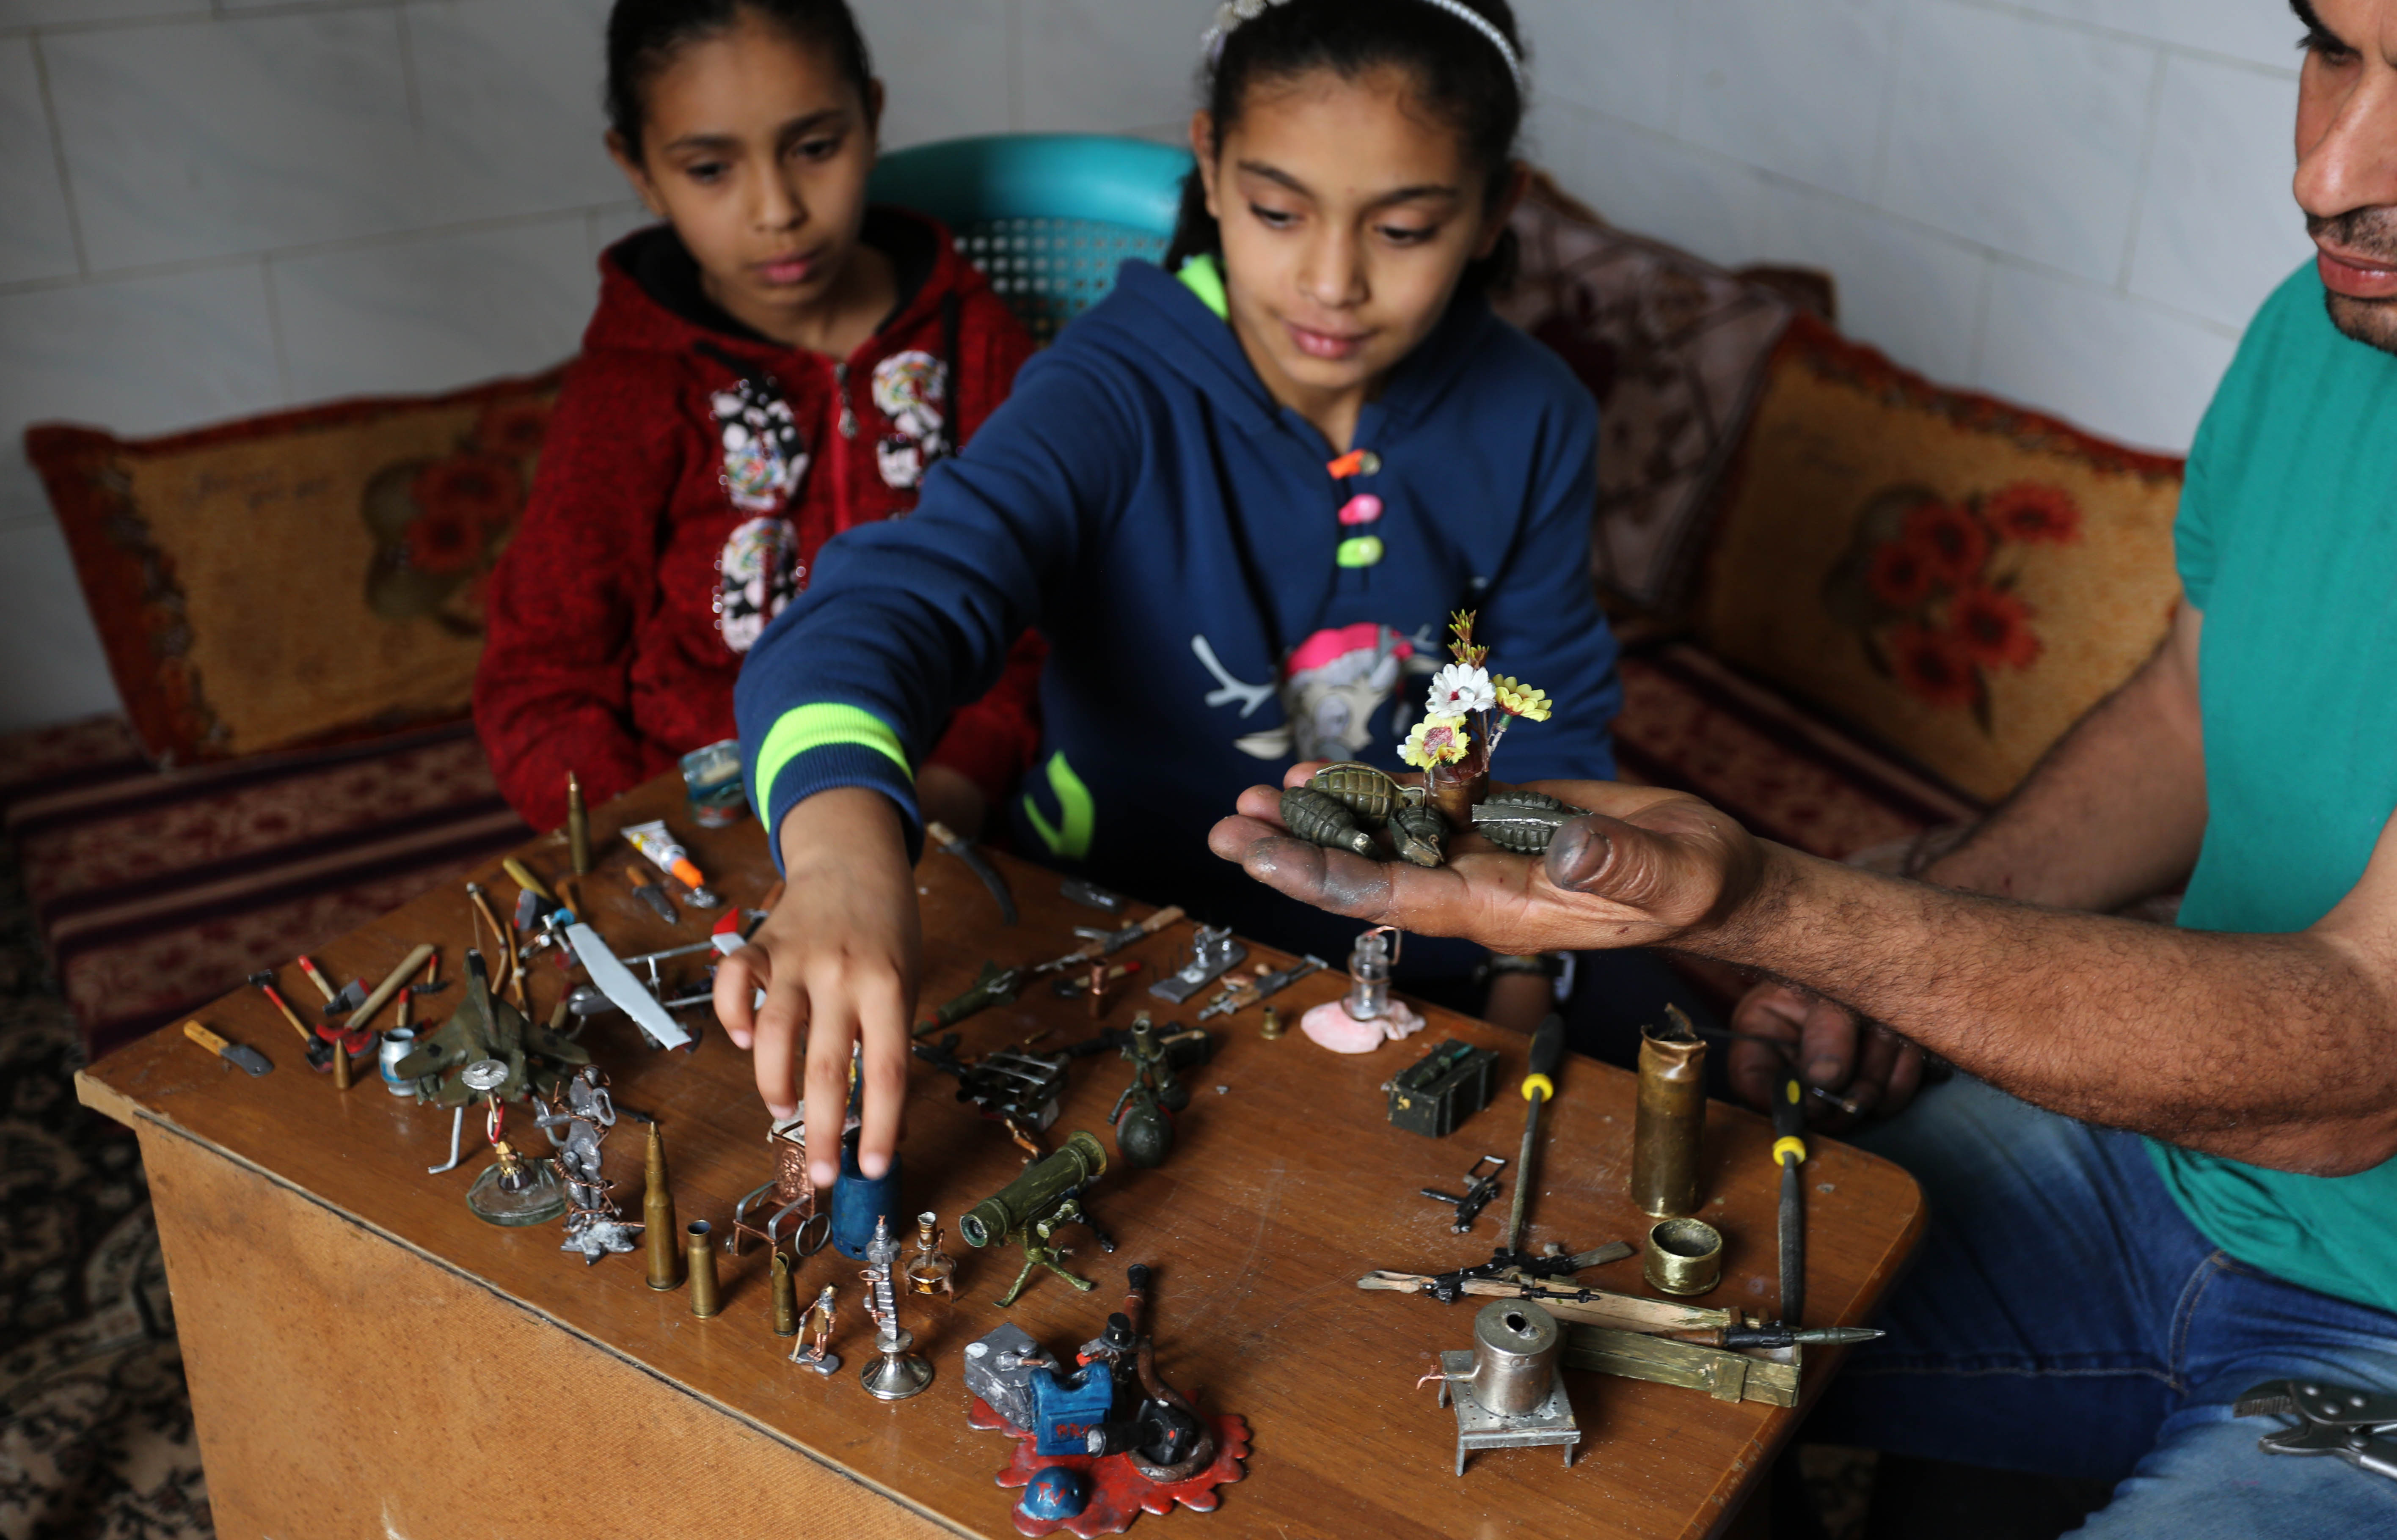 Zayna, who wants to be a fashion designer, and Shahed, show wants to be a lawyer